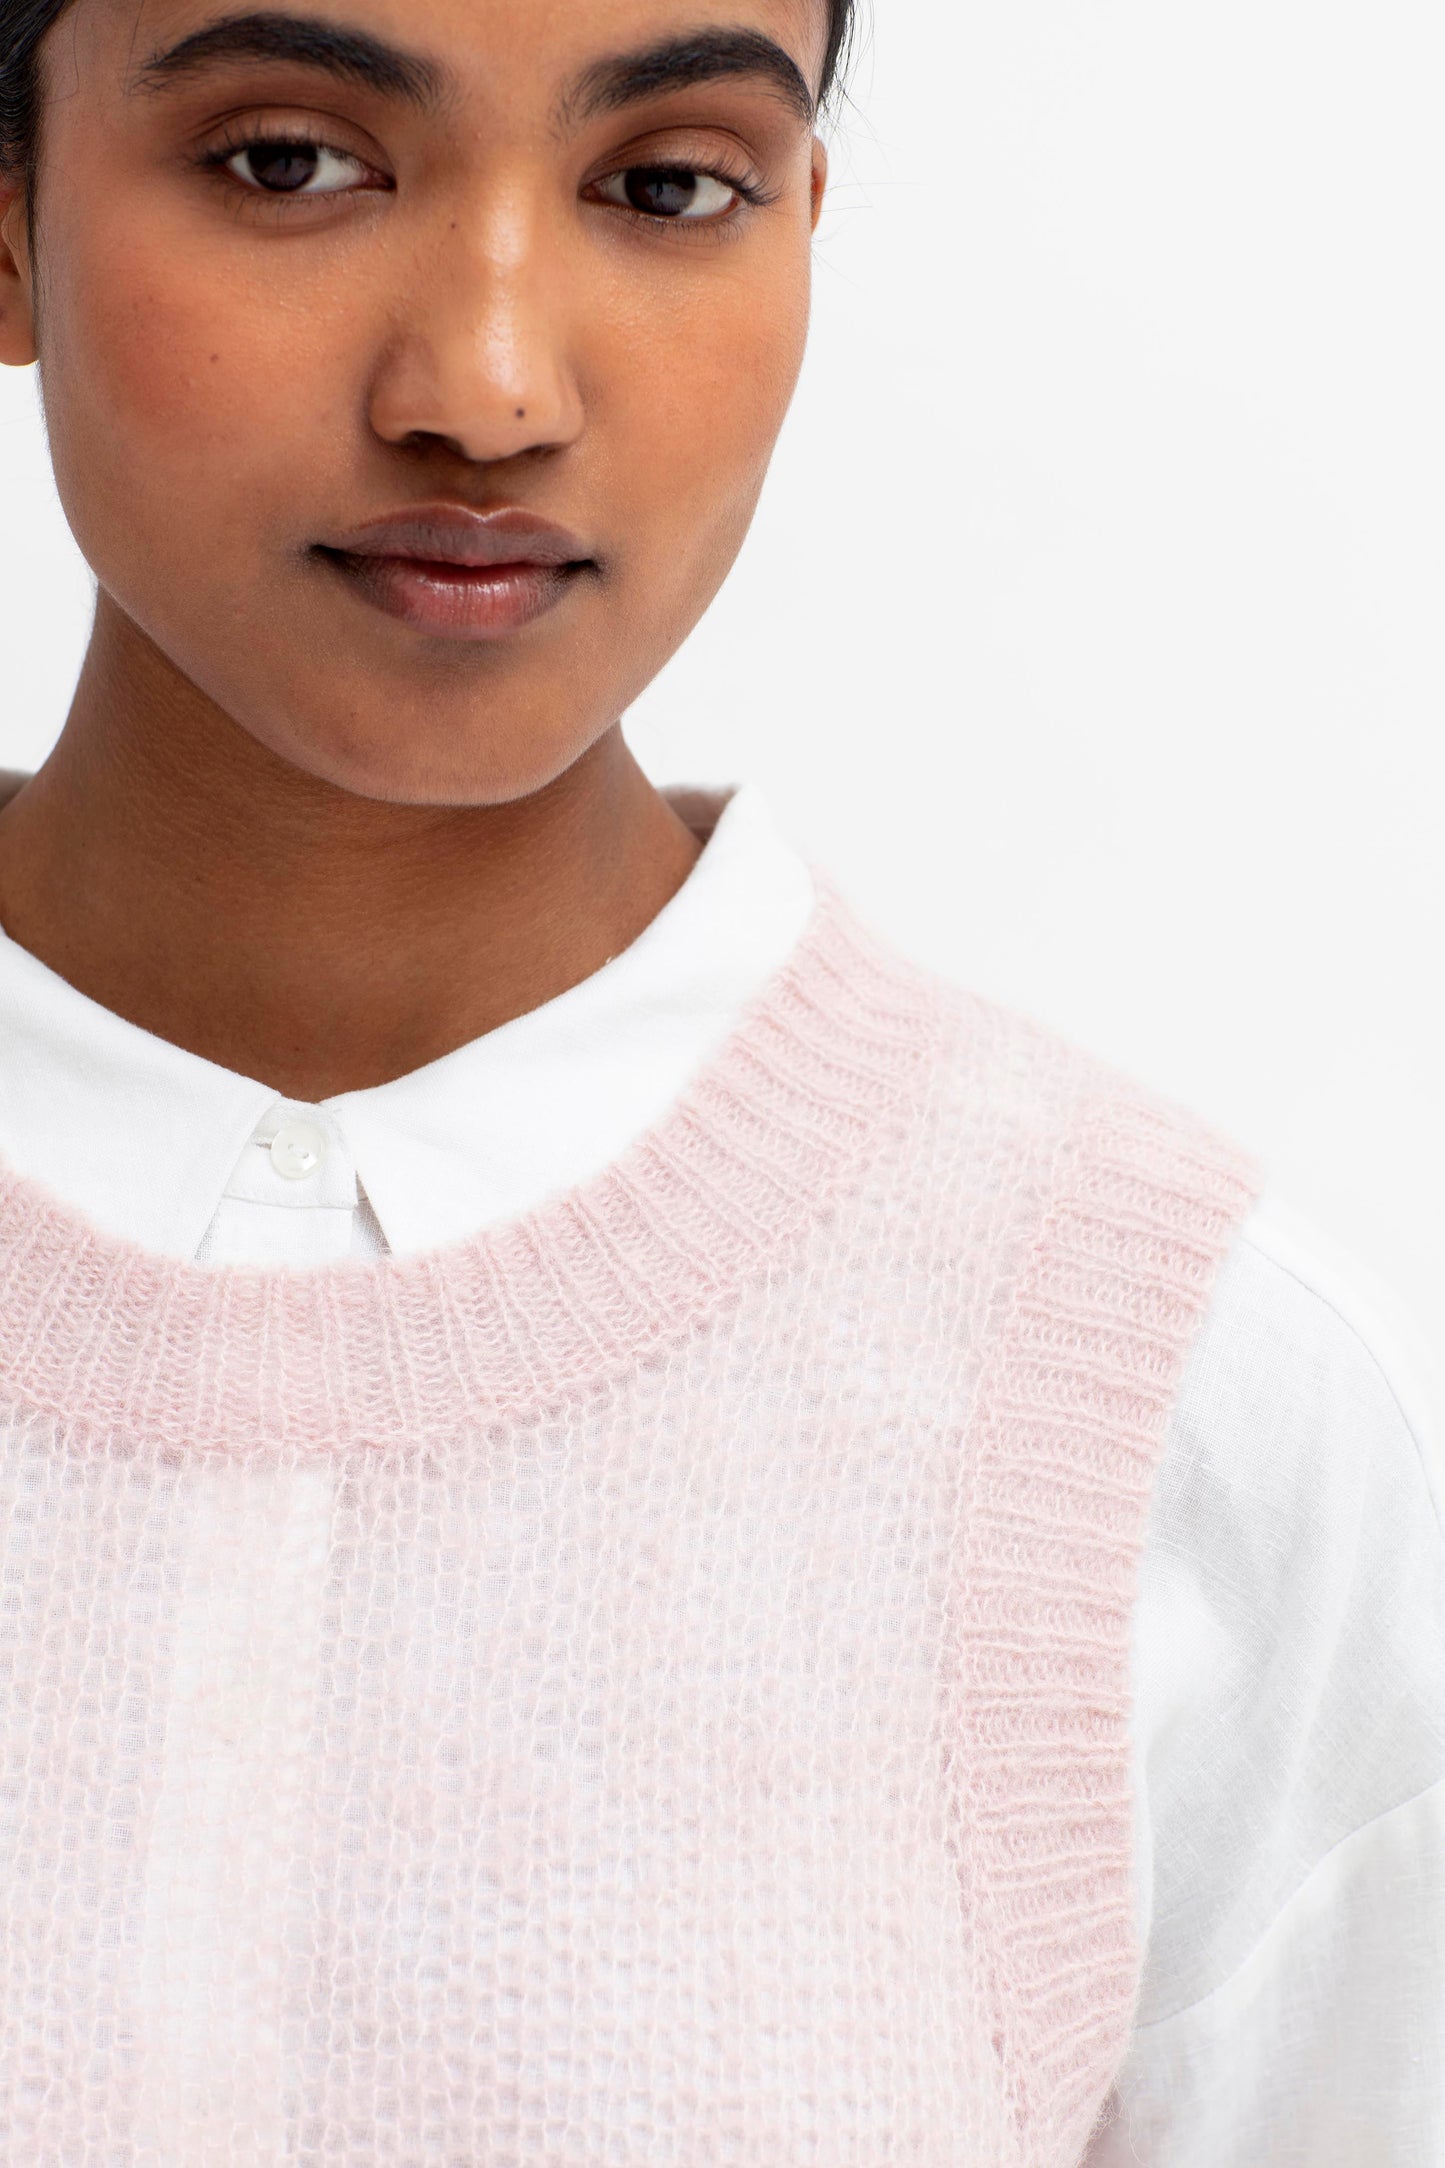 Stropp Loose Weave relaxed fit Knit Vest Model Front Detail | BLUSH PINK